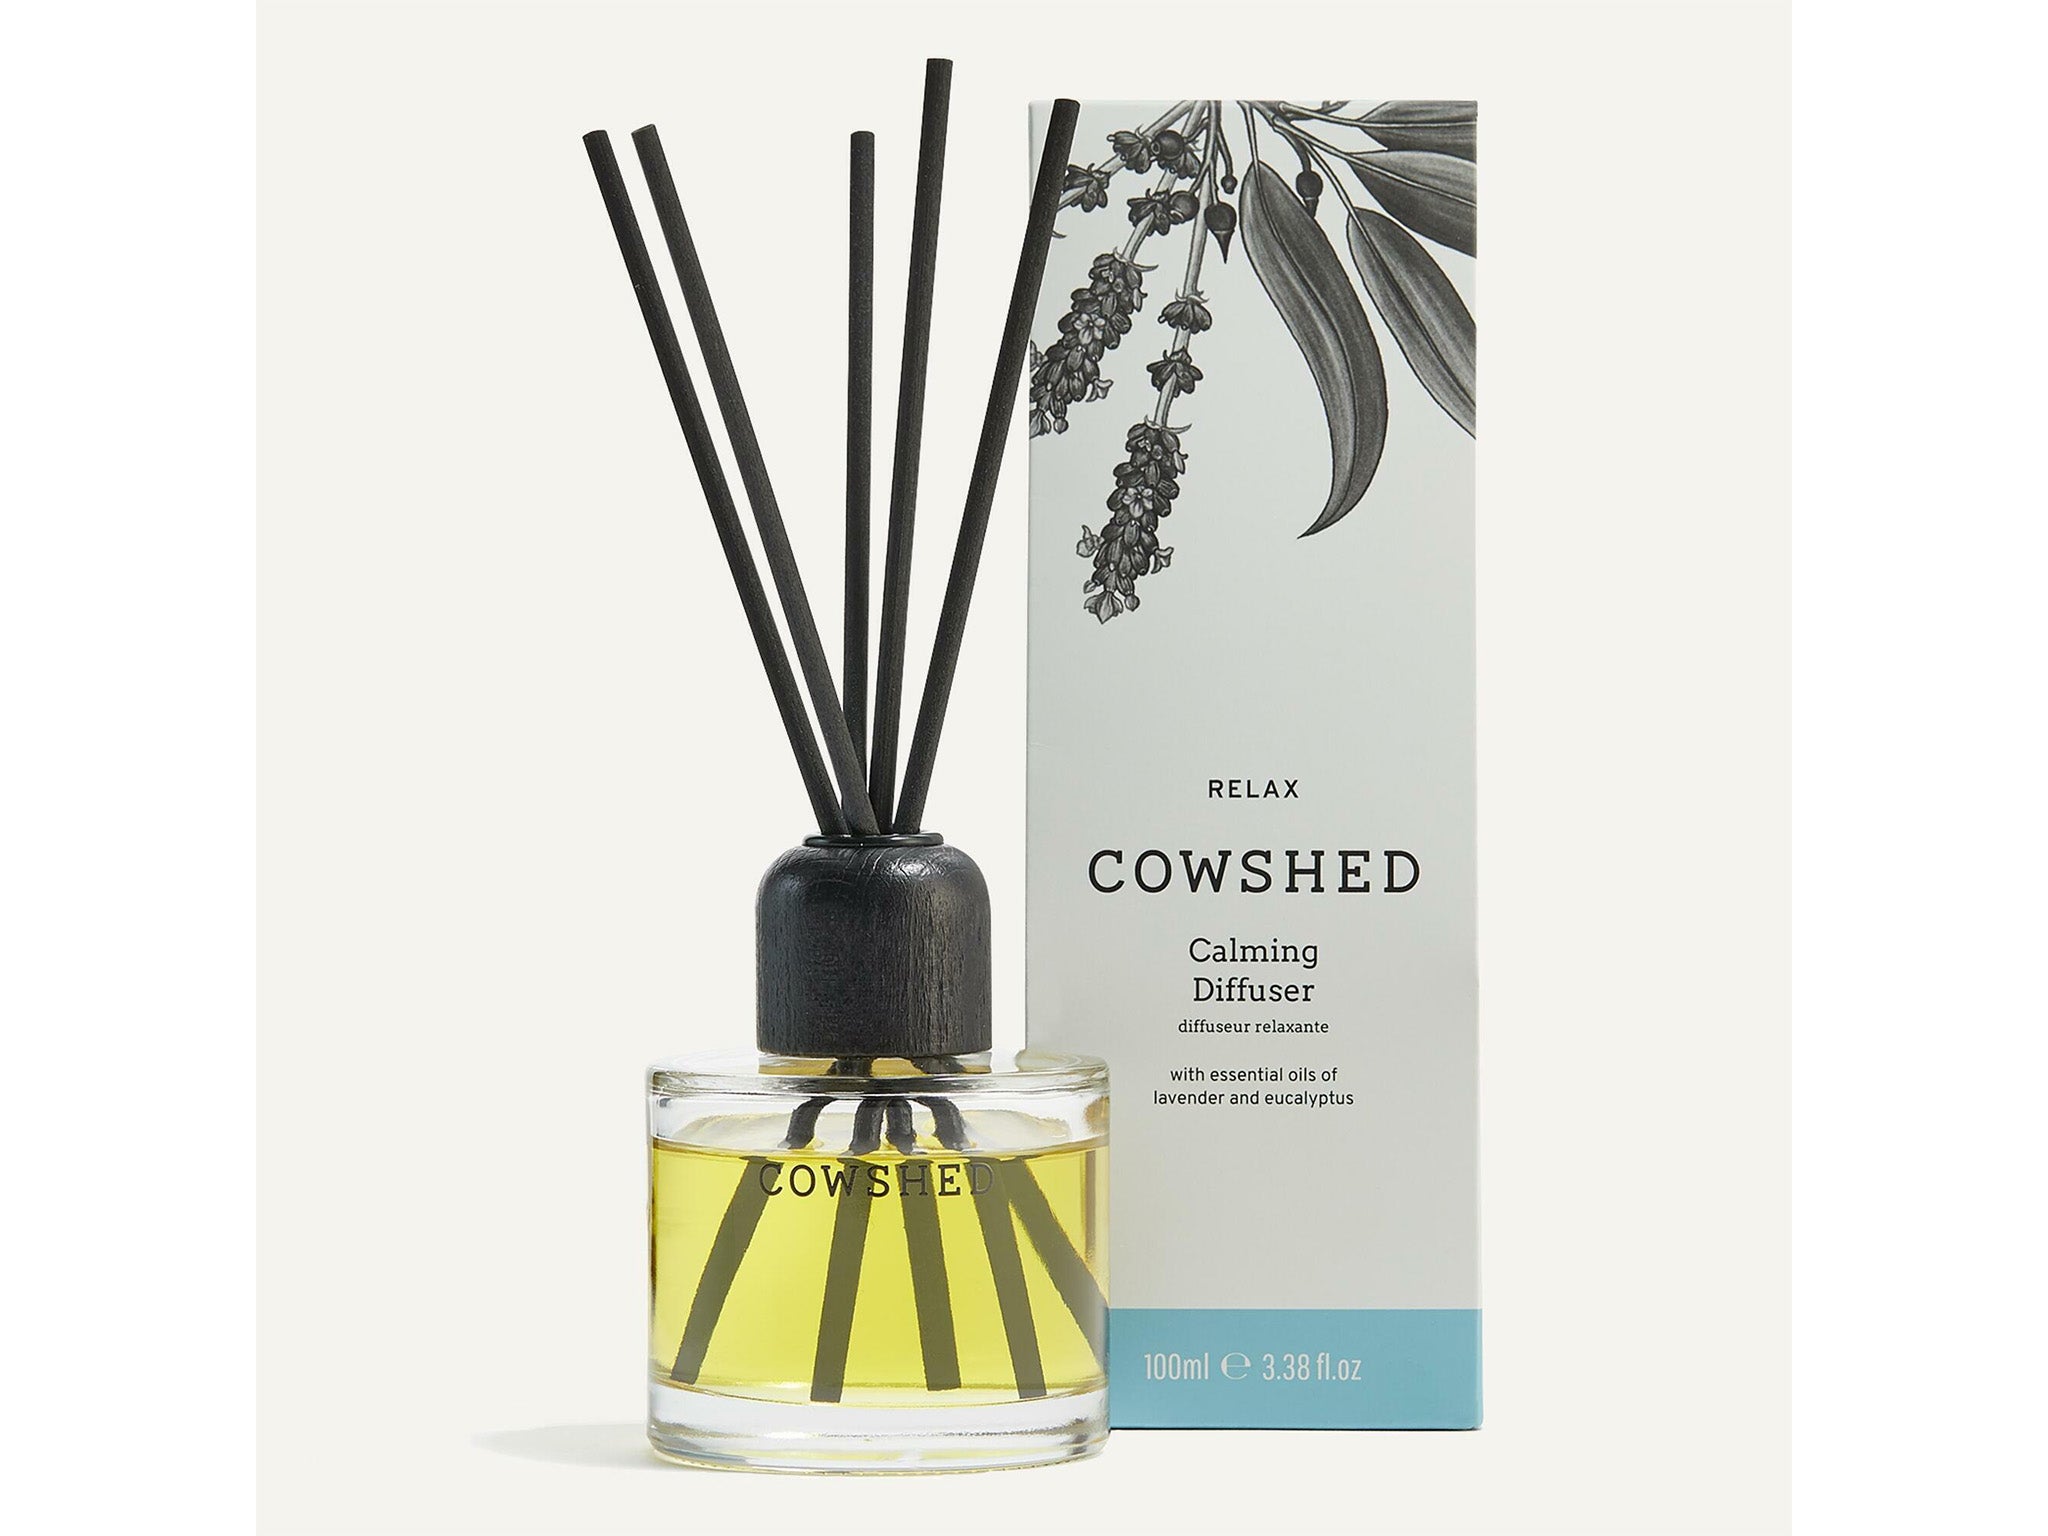 Best diffusers Cowshed relax calming diffuser